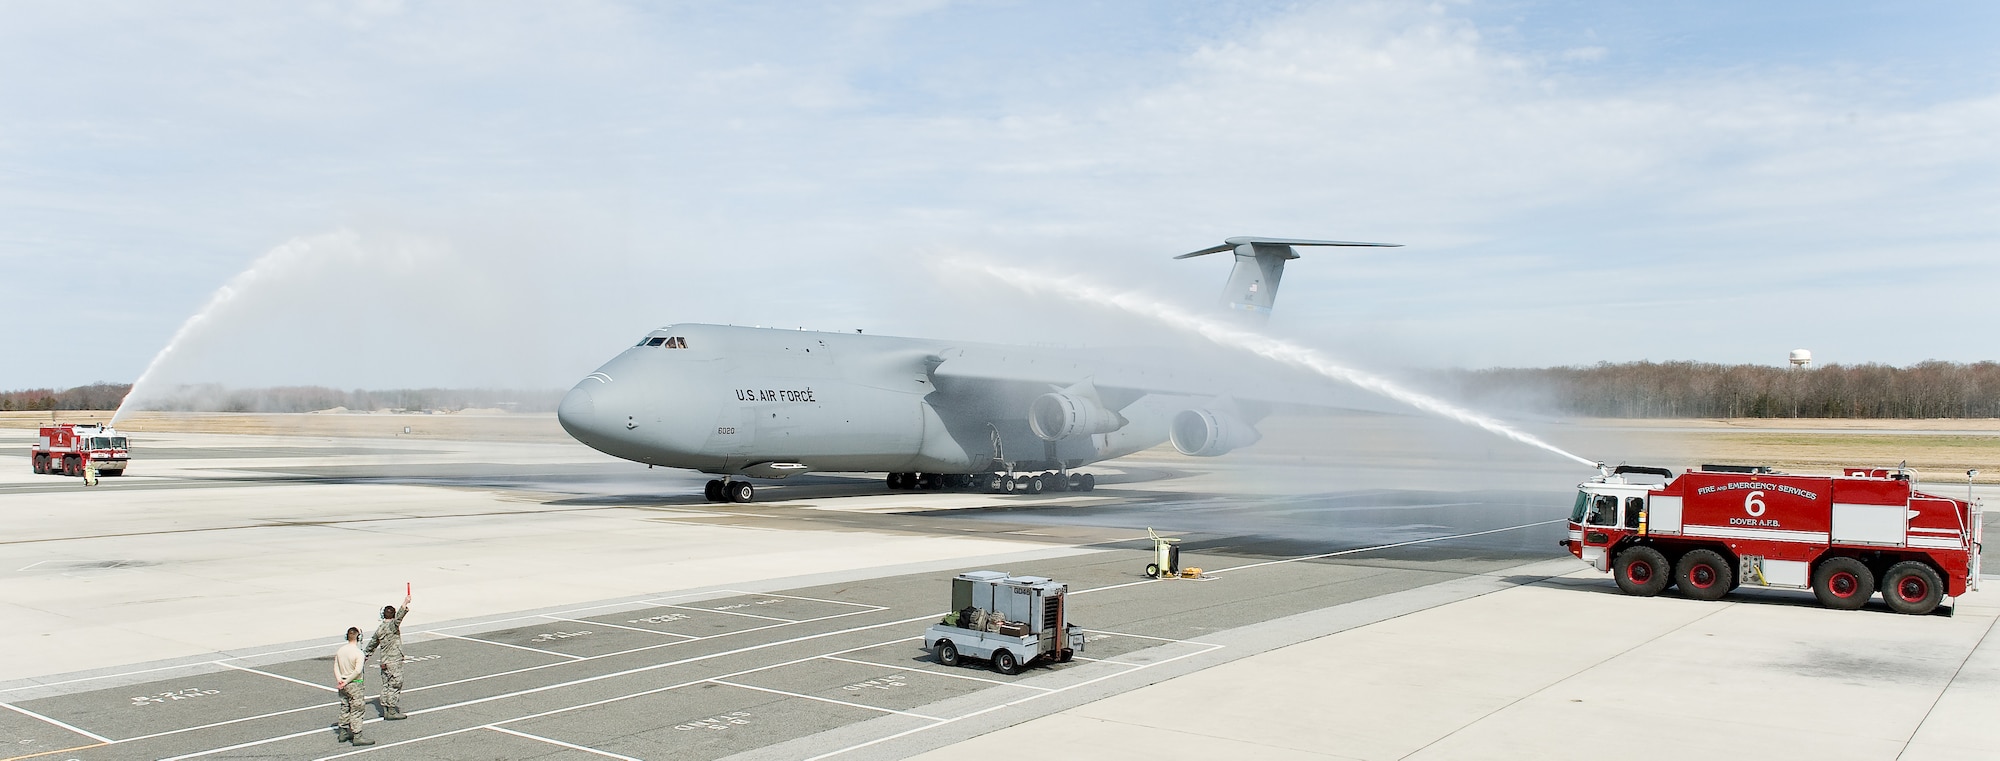 Firetrucks from the 436th Civil Engineer Squadron Fire Department give C-5B Galaxy 86-0020 and aircrew a customary spray-down as it pulls into its parking spot following its “fini flight” March 12, 2012, at Dover Air Force Base, Del. The 9th Airlift Squadron now exclusively employs the C-5M Super Galaxy for local training, and state-side and overseas missions. (U.S. Air Force photo by Roland Balik)